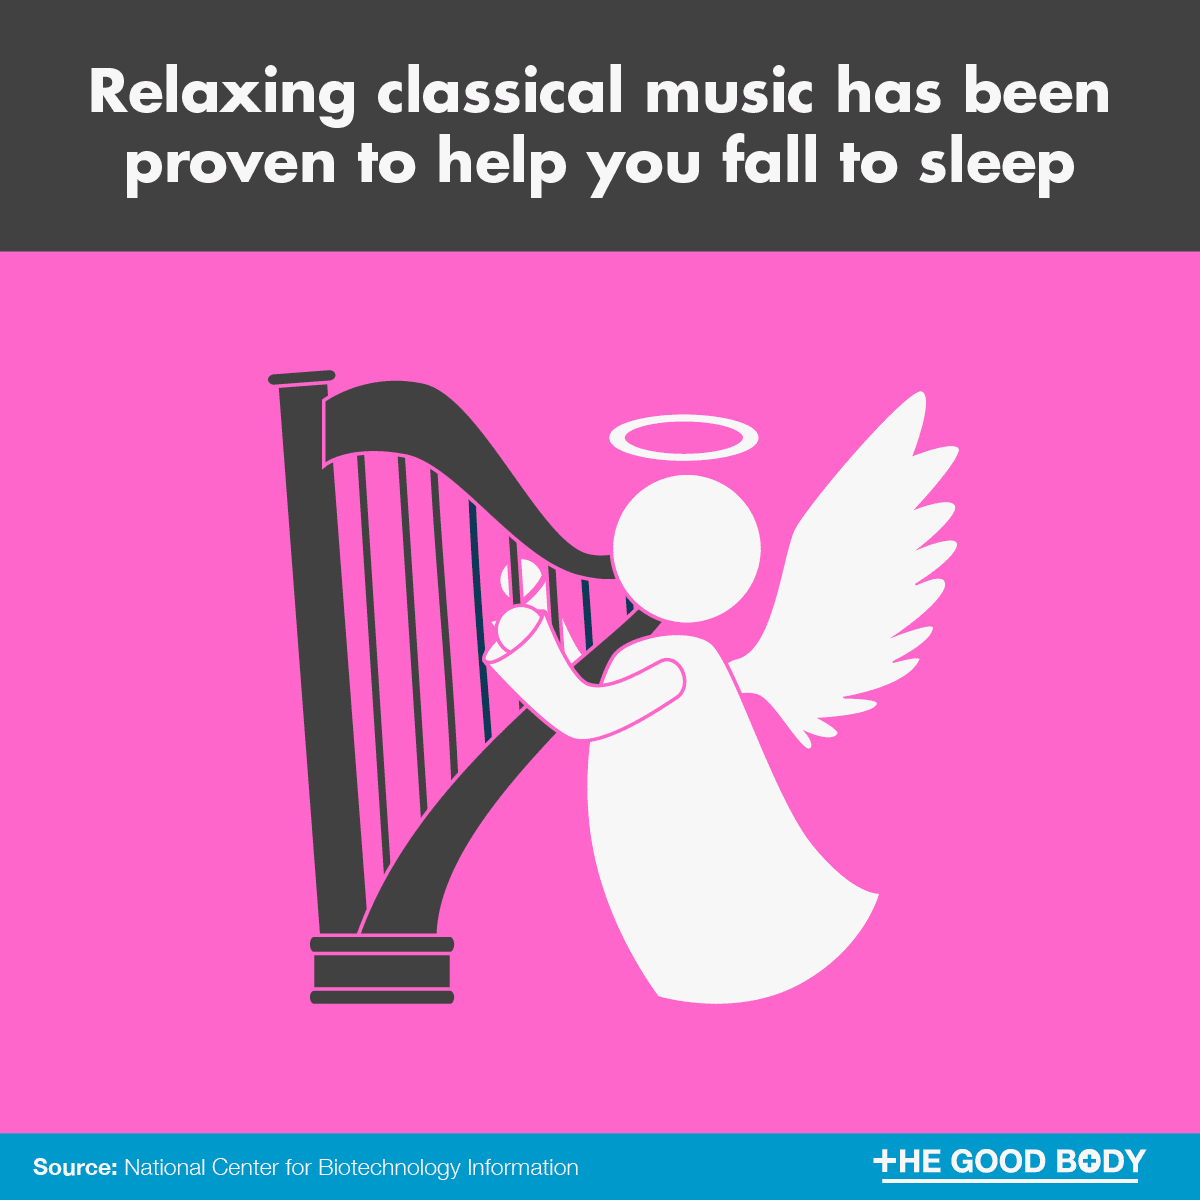 Relaxing classical music has been proven to help you fall to sleep